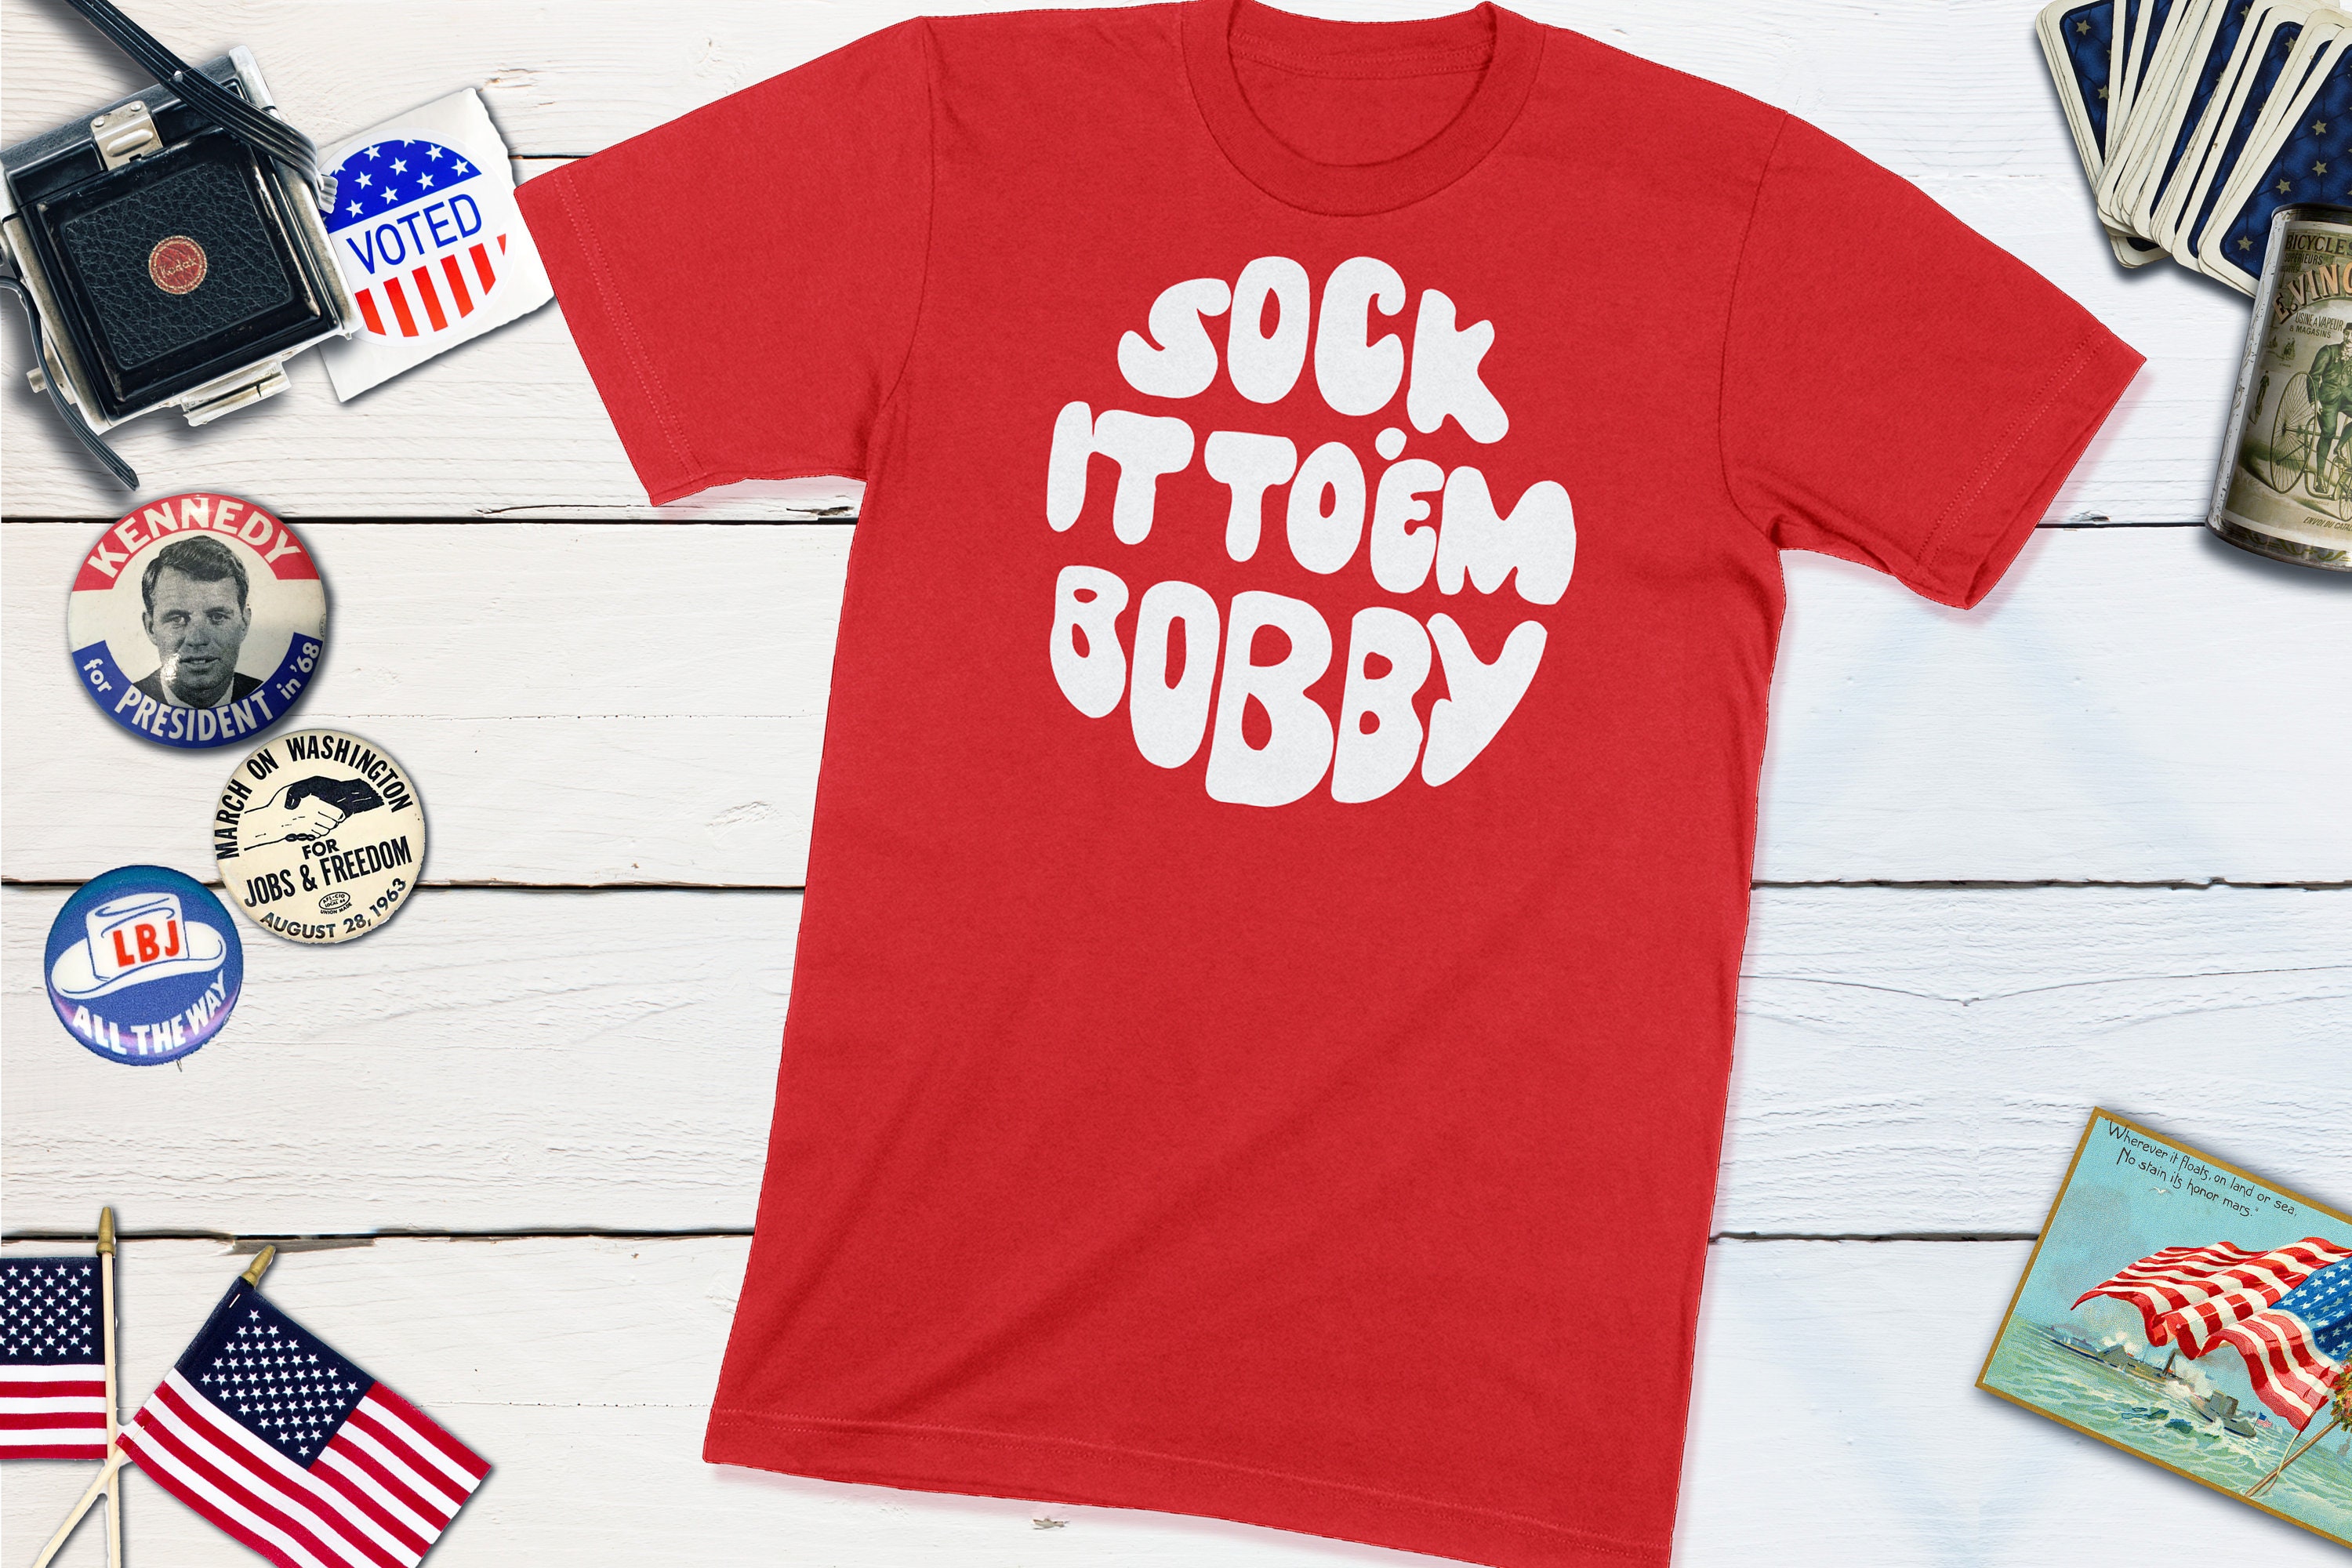 Robert 'Bobby' Kennedy 'Sock It to 'Em Bobby' 1968 Presidential Campaign T- Shirt - Retro Campaigns